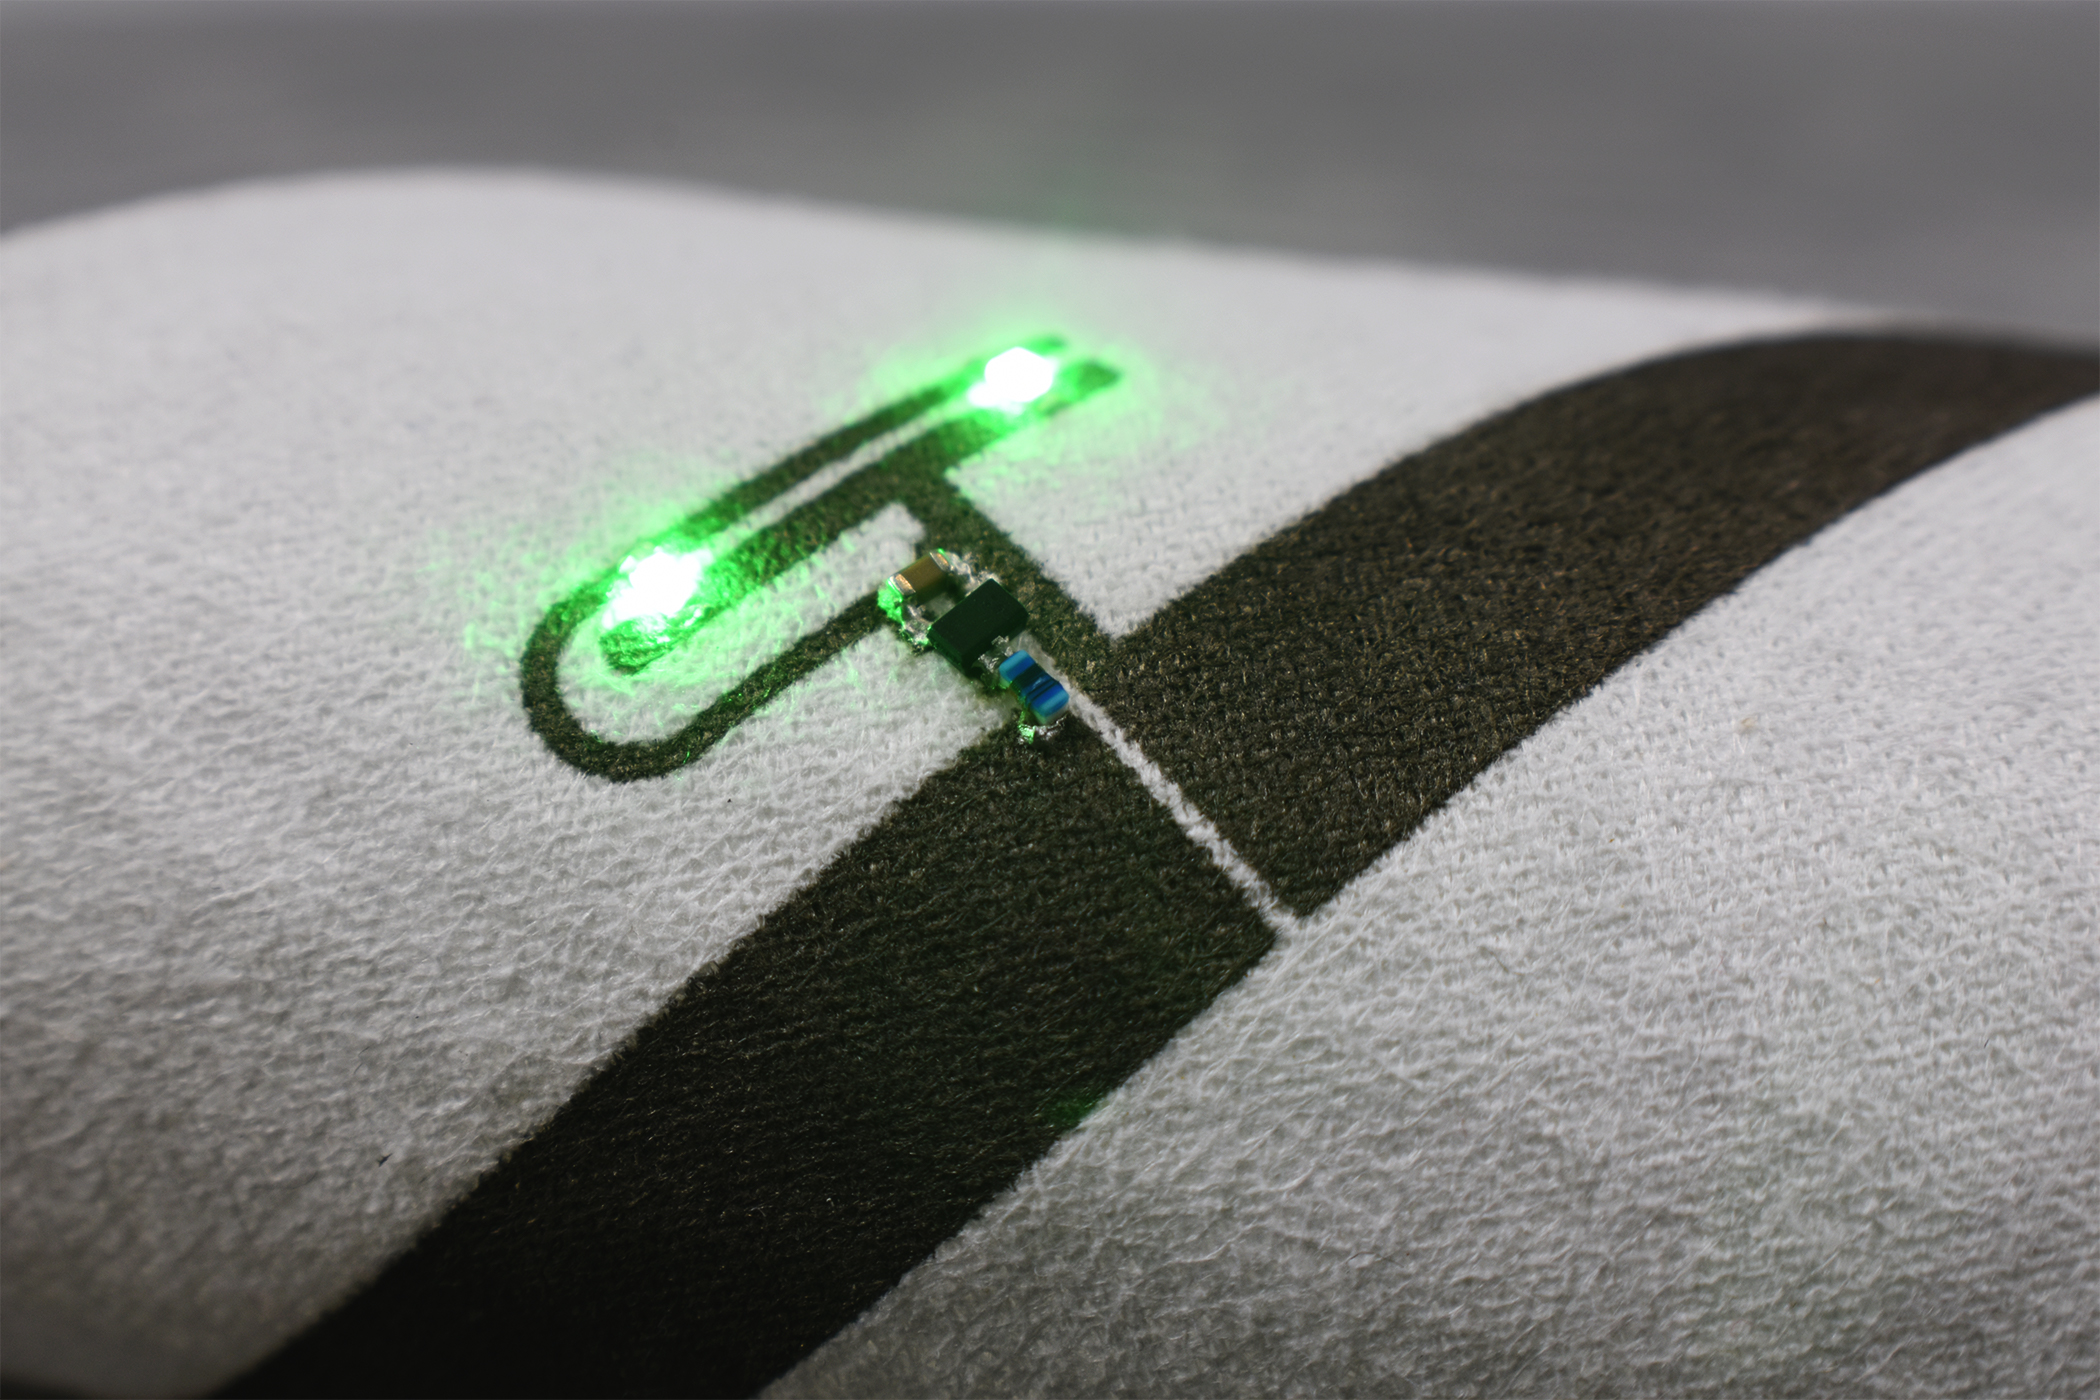 Liquid X’s particle-free inks can print circuitry on smart e-textiles that bend and flex without affecting functionality. LEDs mounted to printed traces light up via Powercast's wireless power tech.